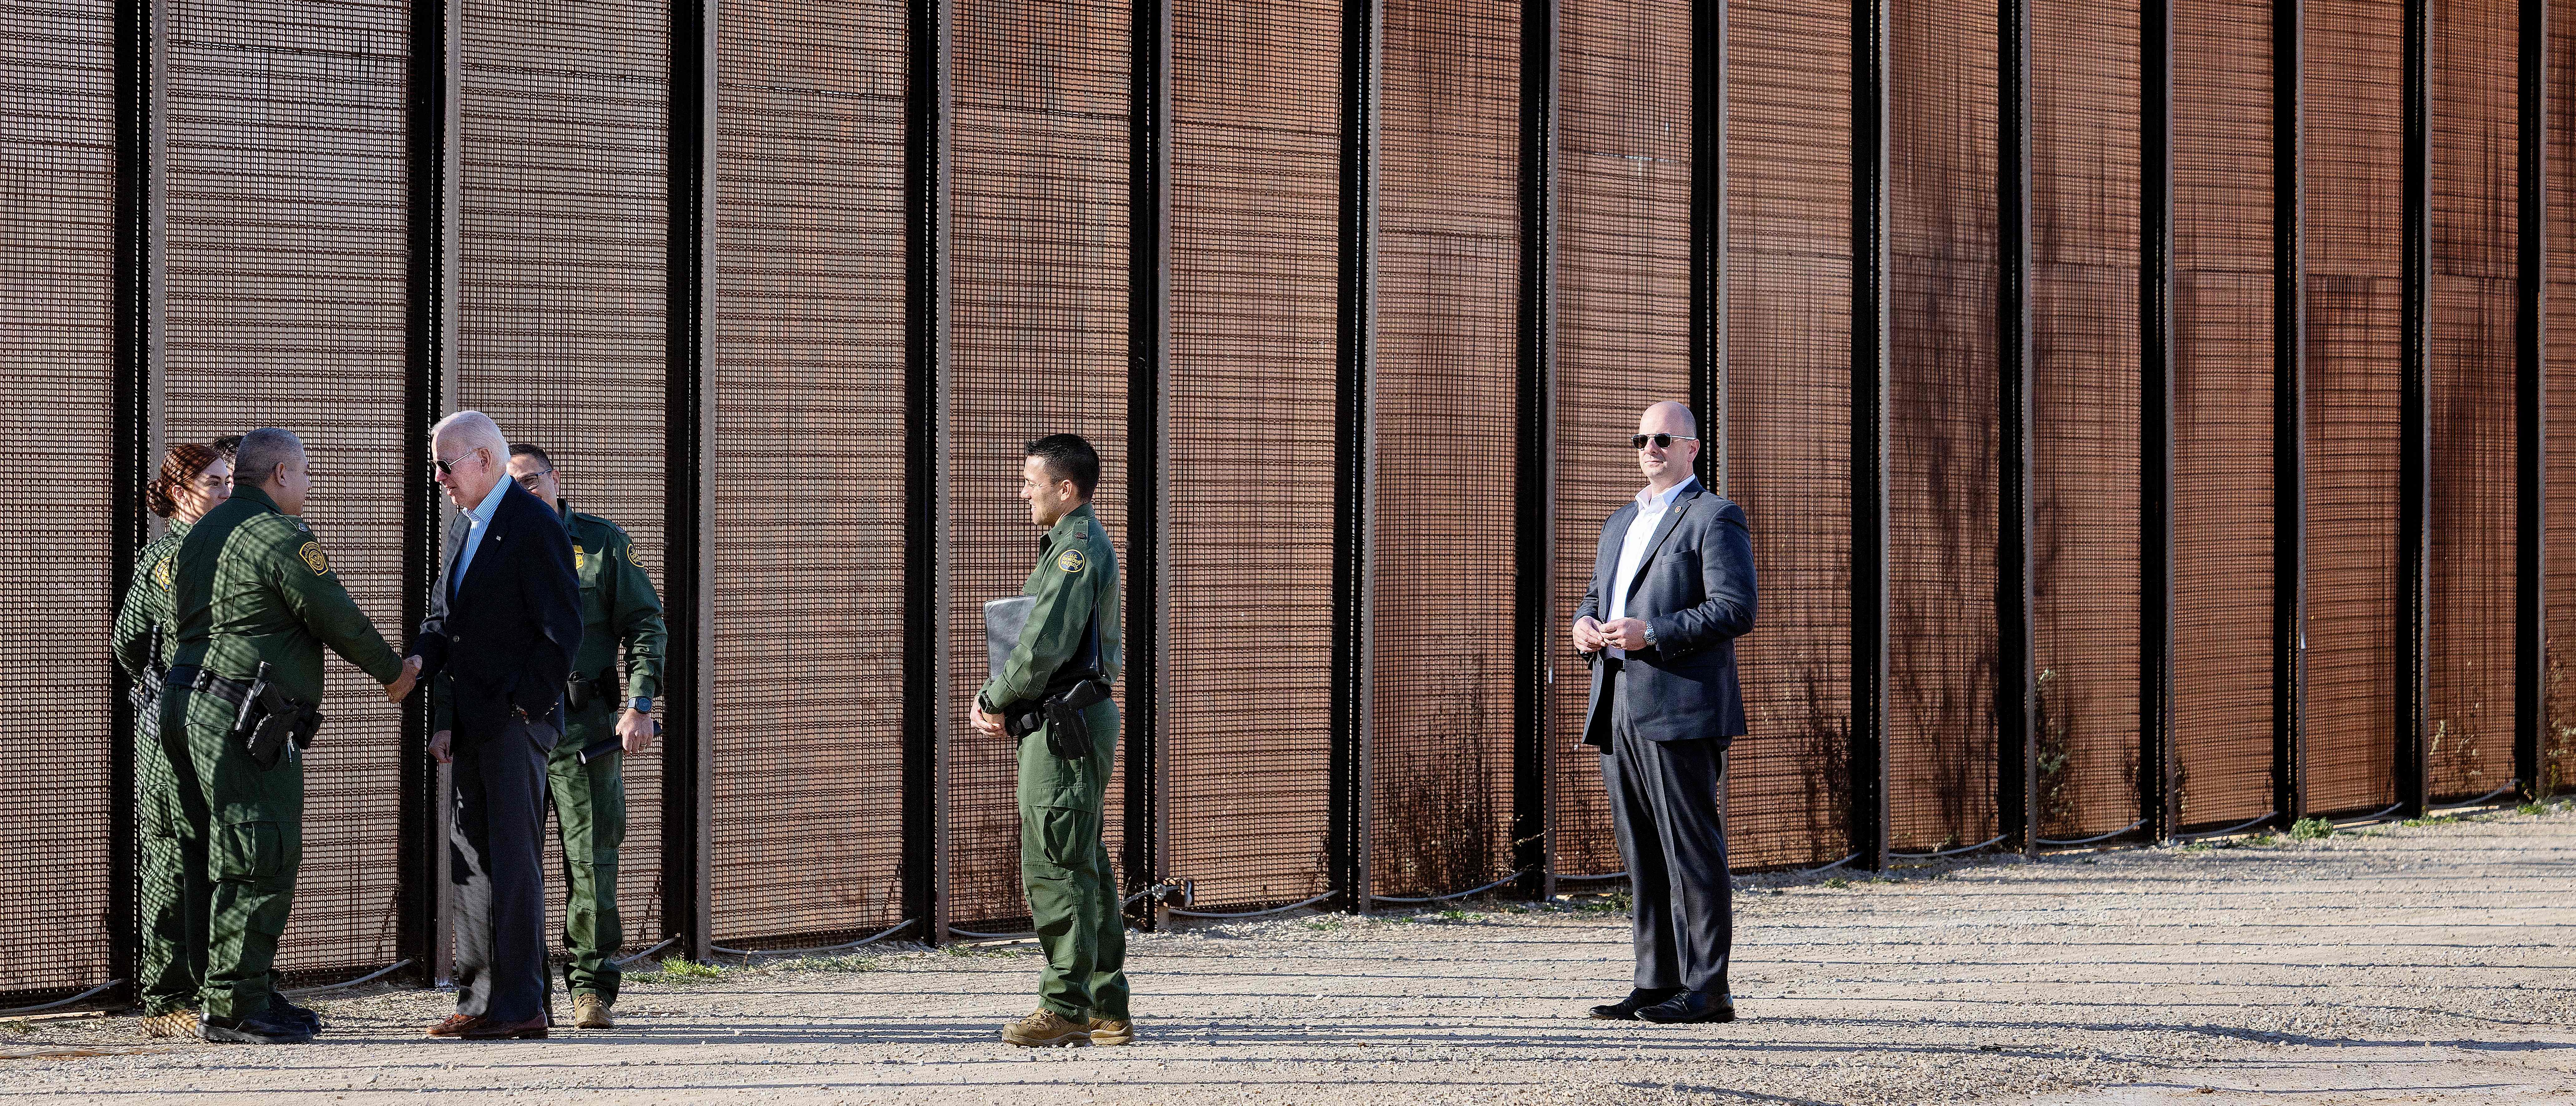 US President Joe Biden speaks with US Customs and Border Protection officers as he visits the US-Mexico border in El Paso, Texas, on January 8, 2023. (Photo by Jim WATSON / AFP) (Photo by JIM WATSON/AFP via Getty Images)